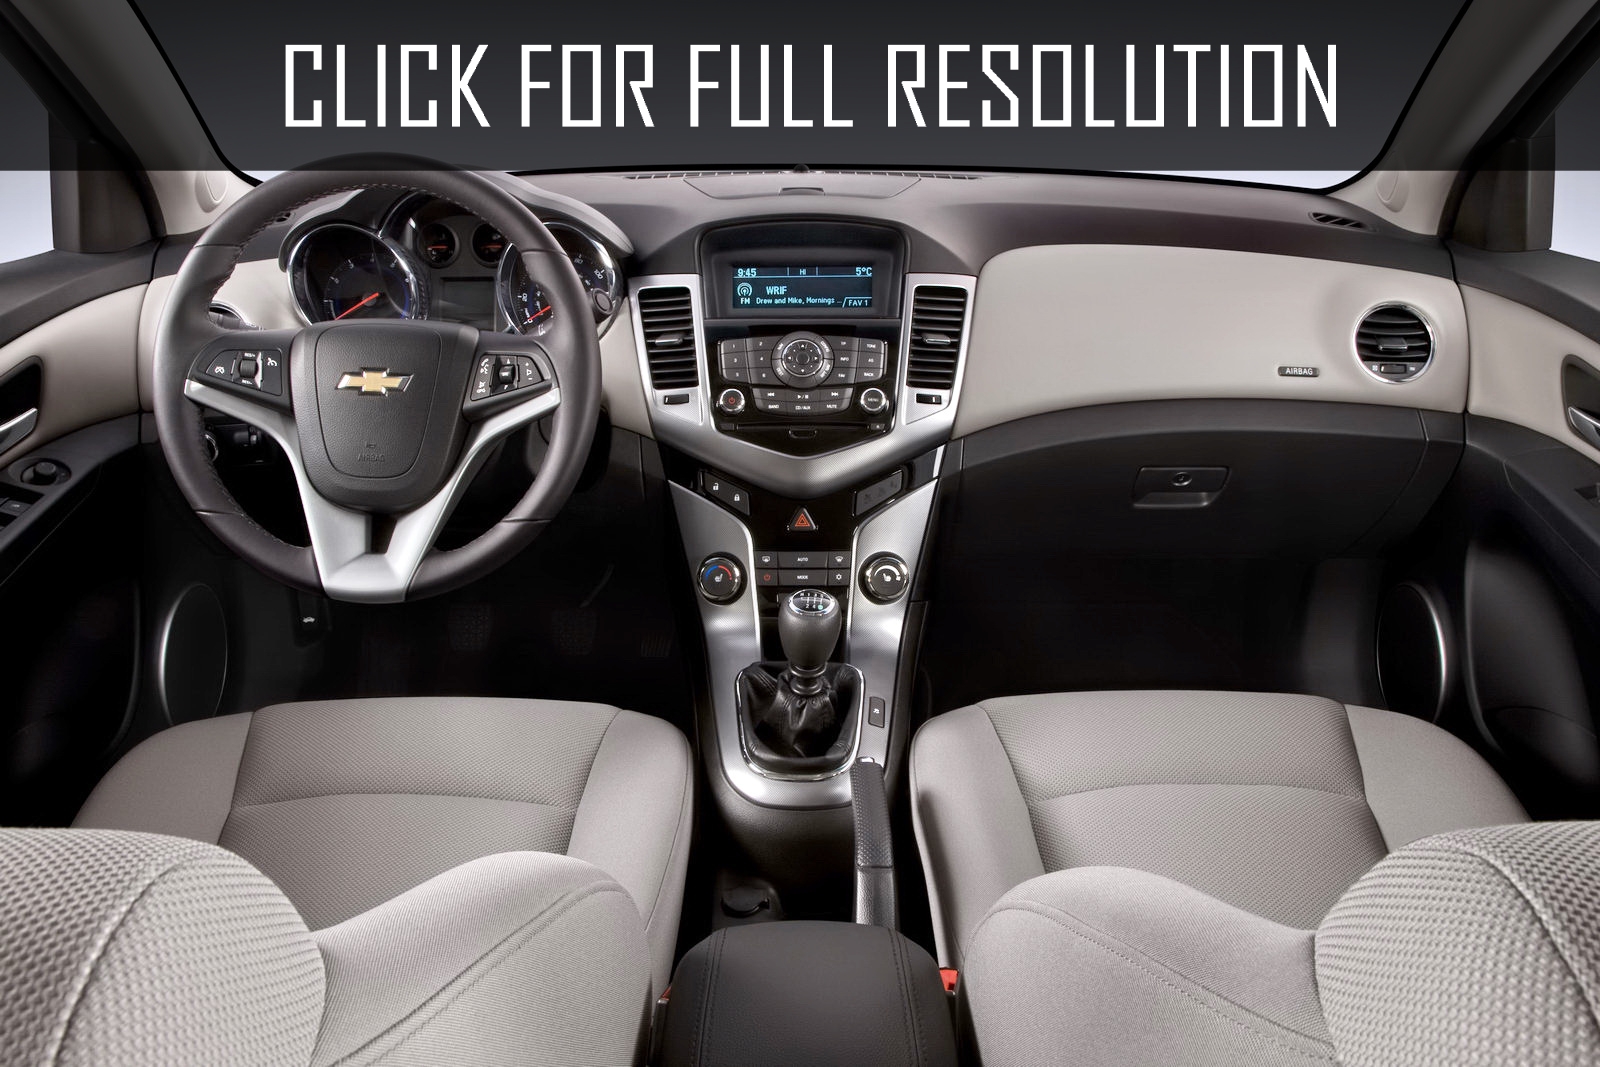 Chevrolet Cruze Lt 2015 Reviews Prices Ratings With